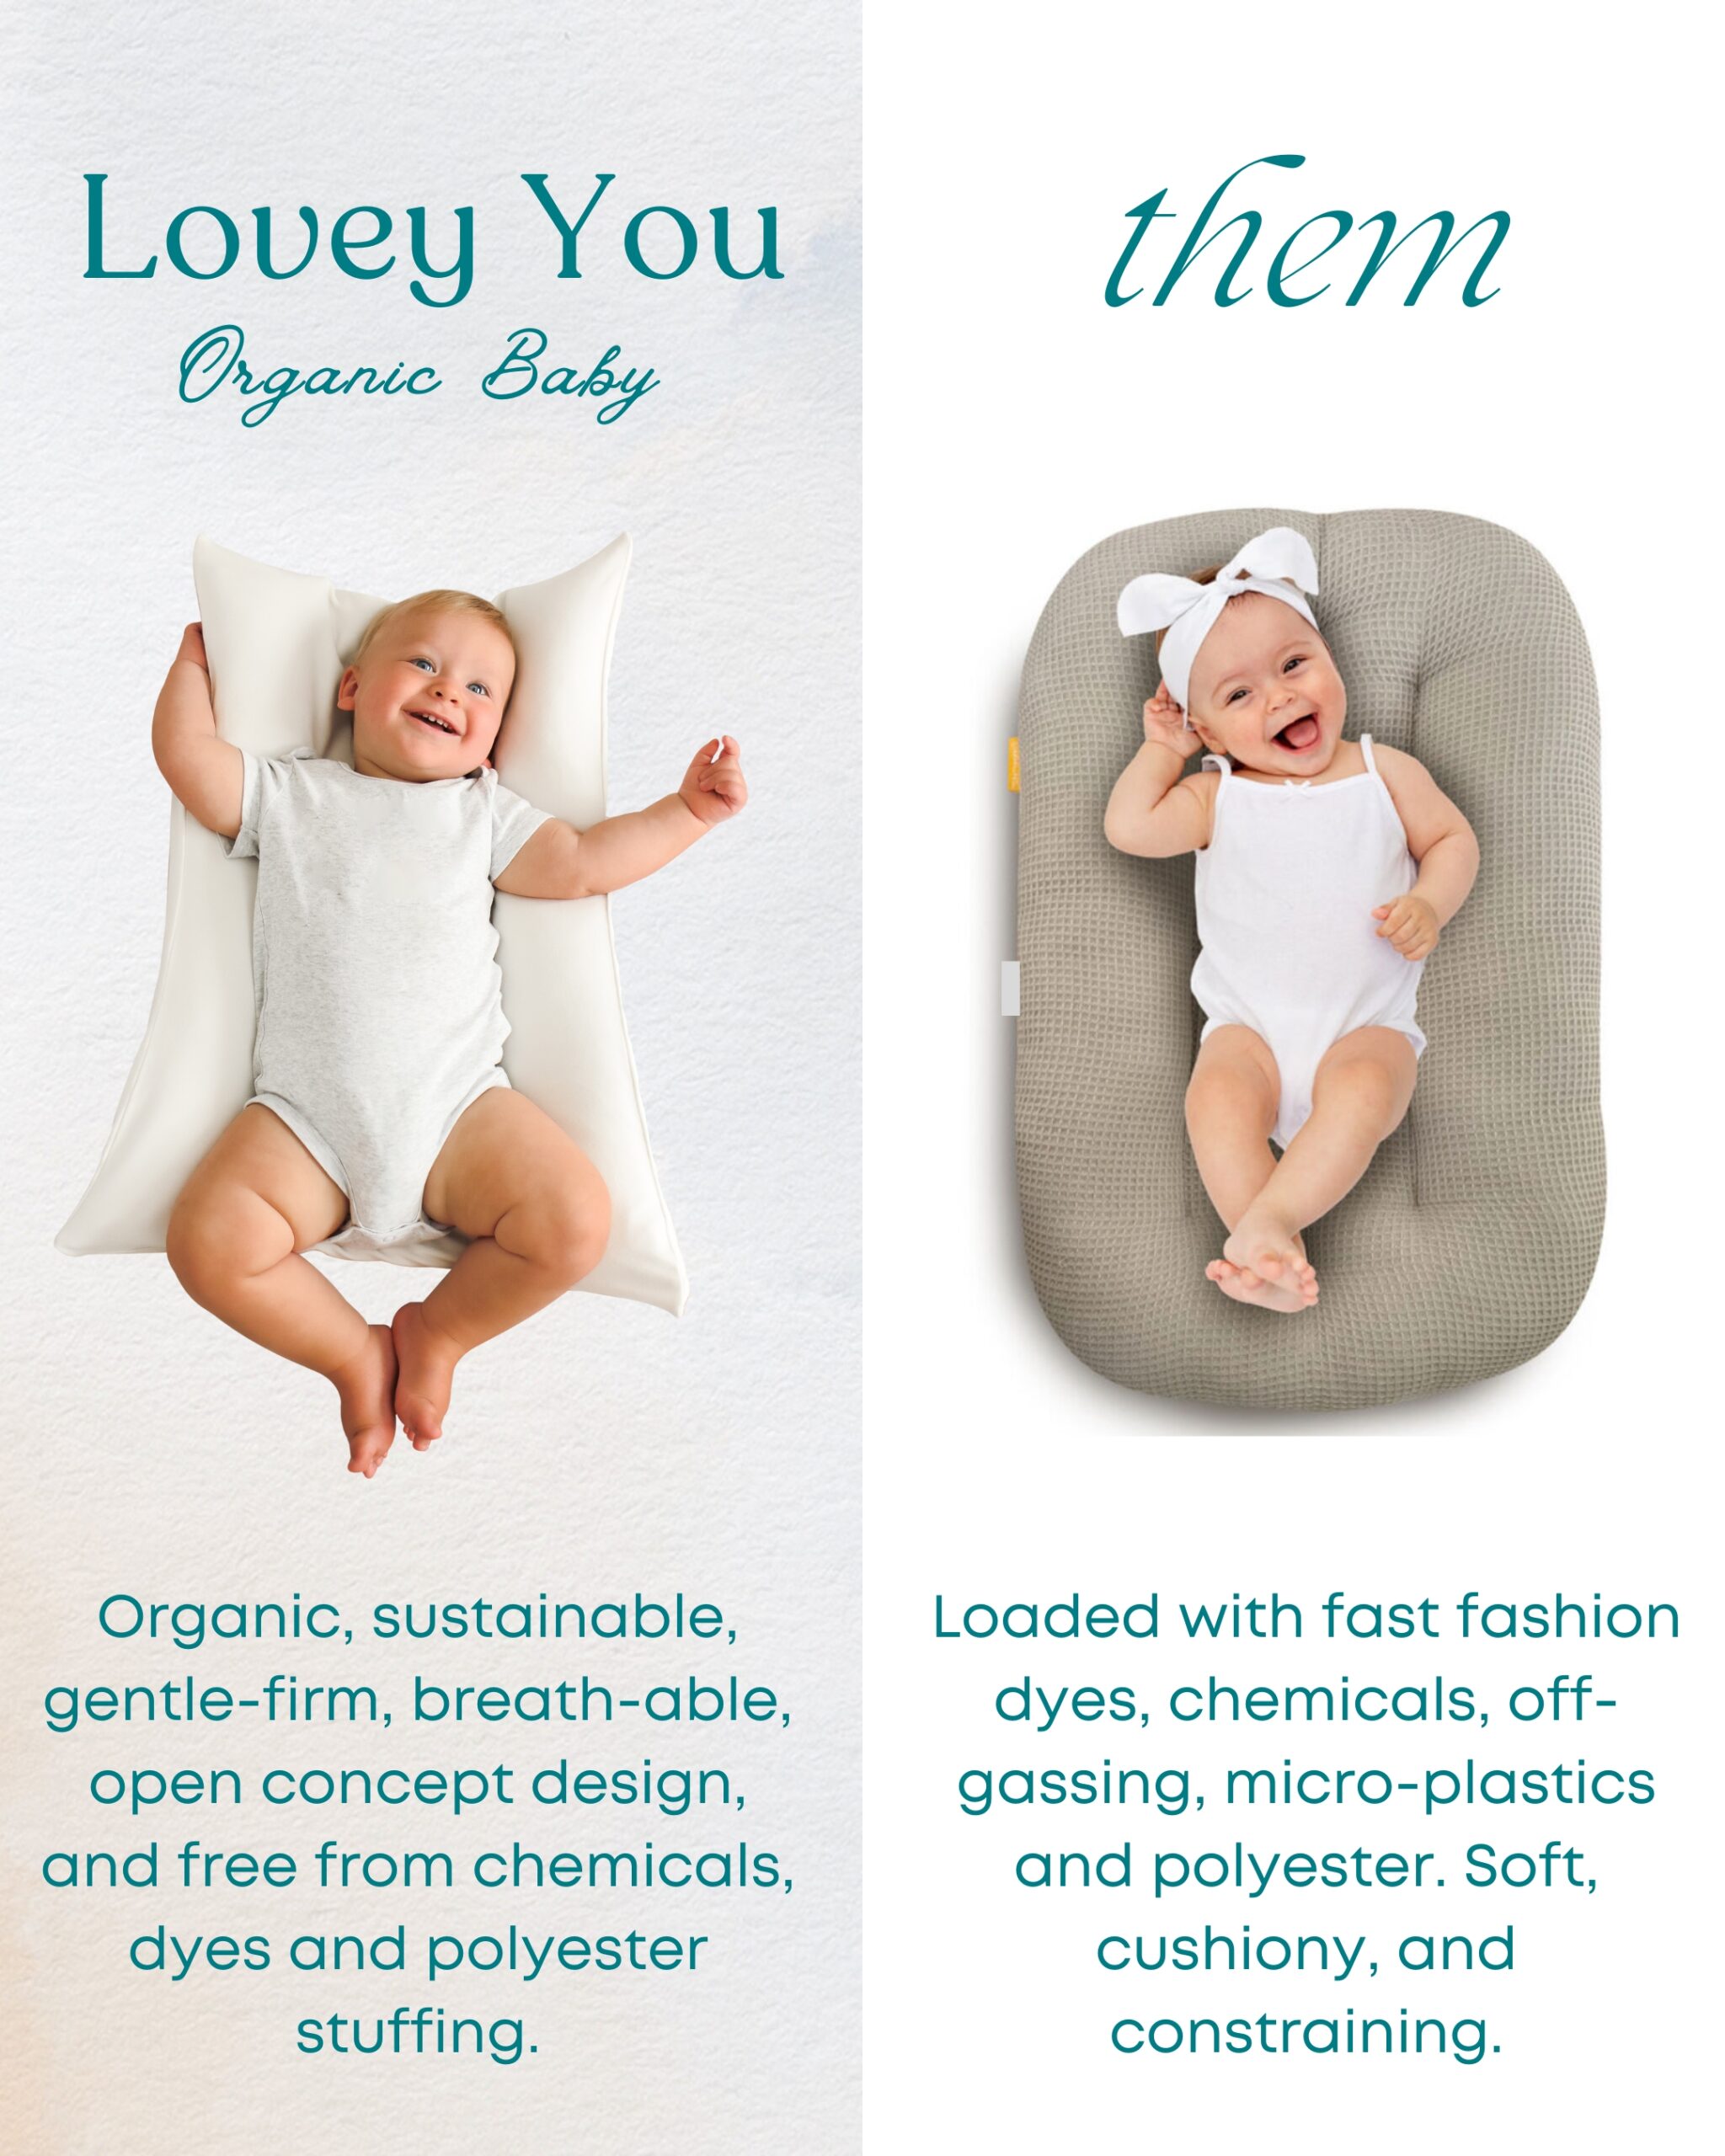 Lovey You Organic Baby comparison with other retailers